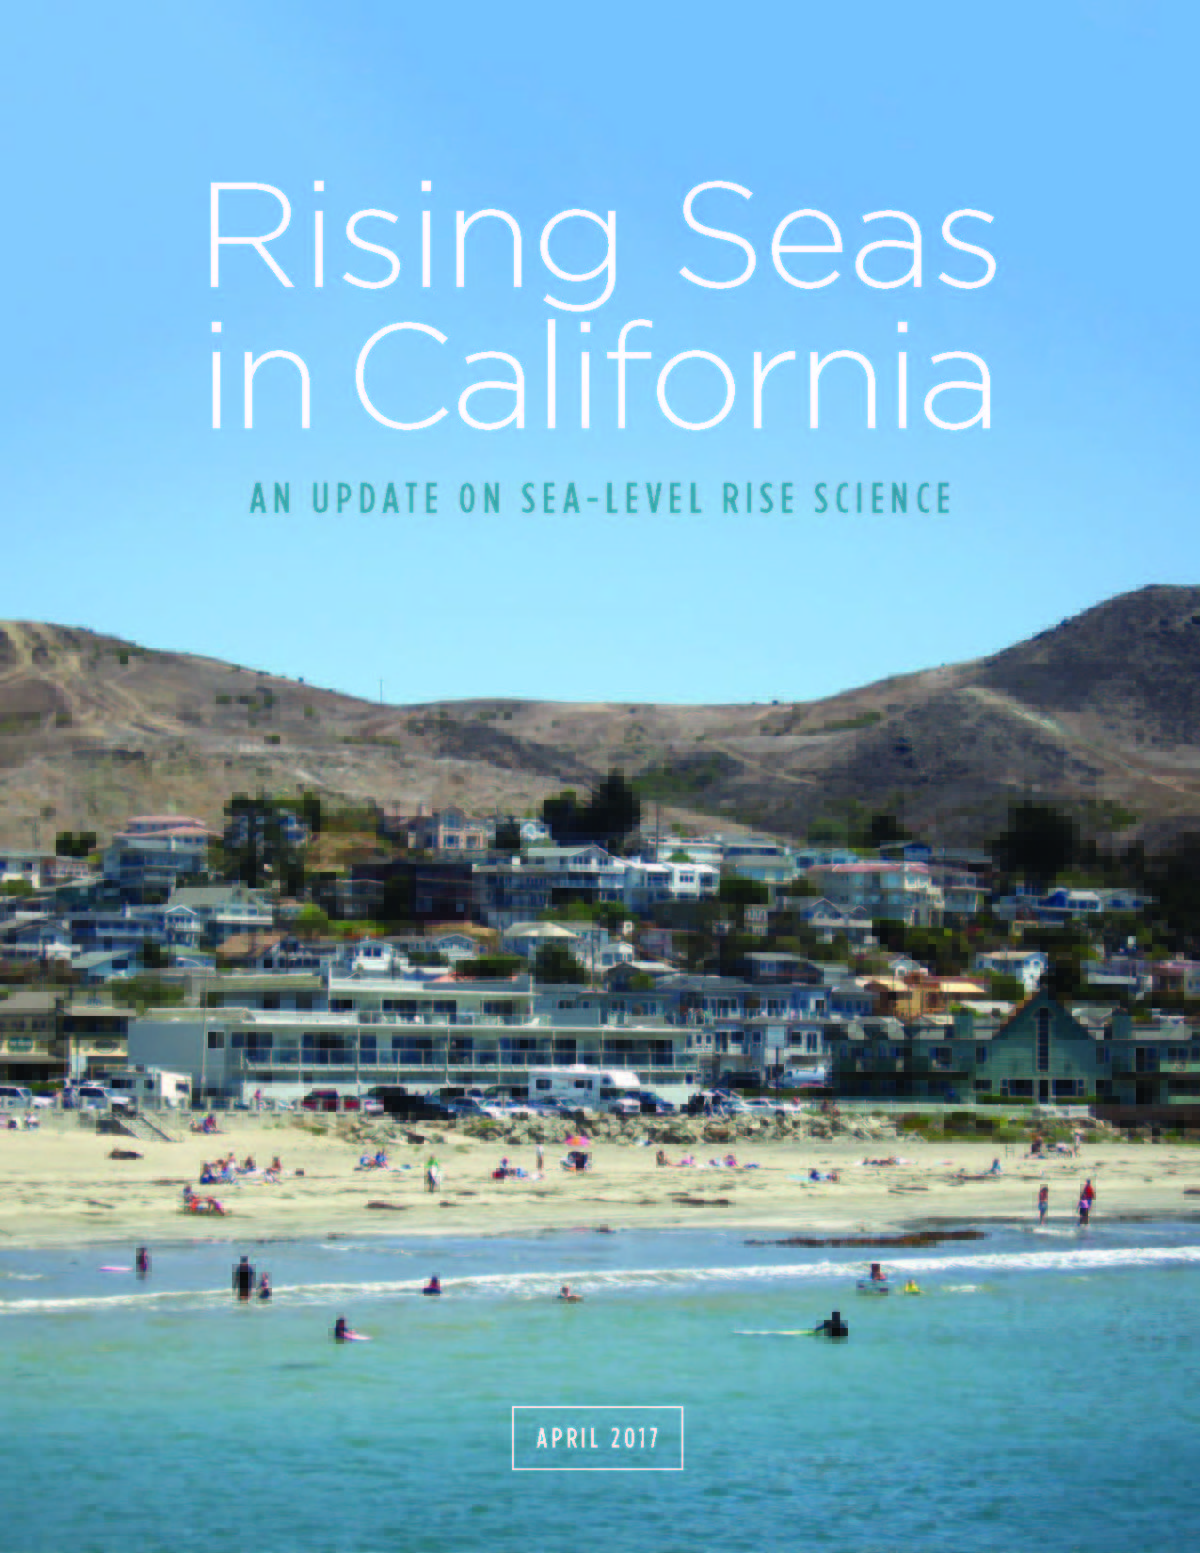 Rising seas in California: An update on sea-level rise science